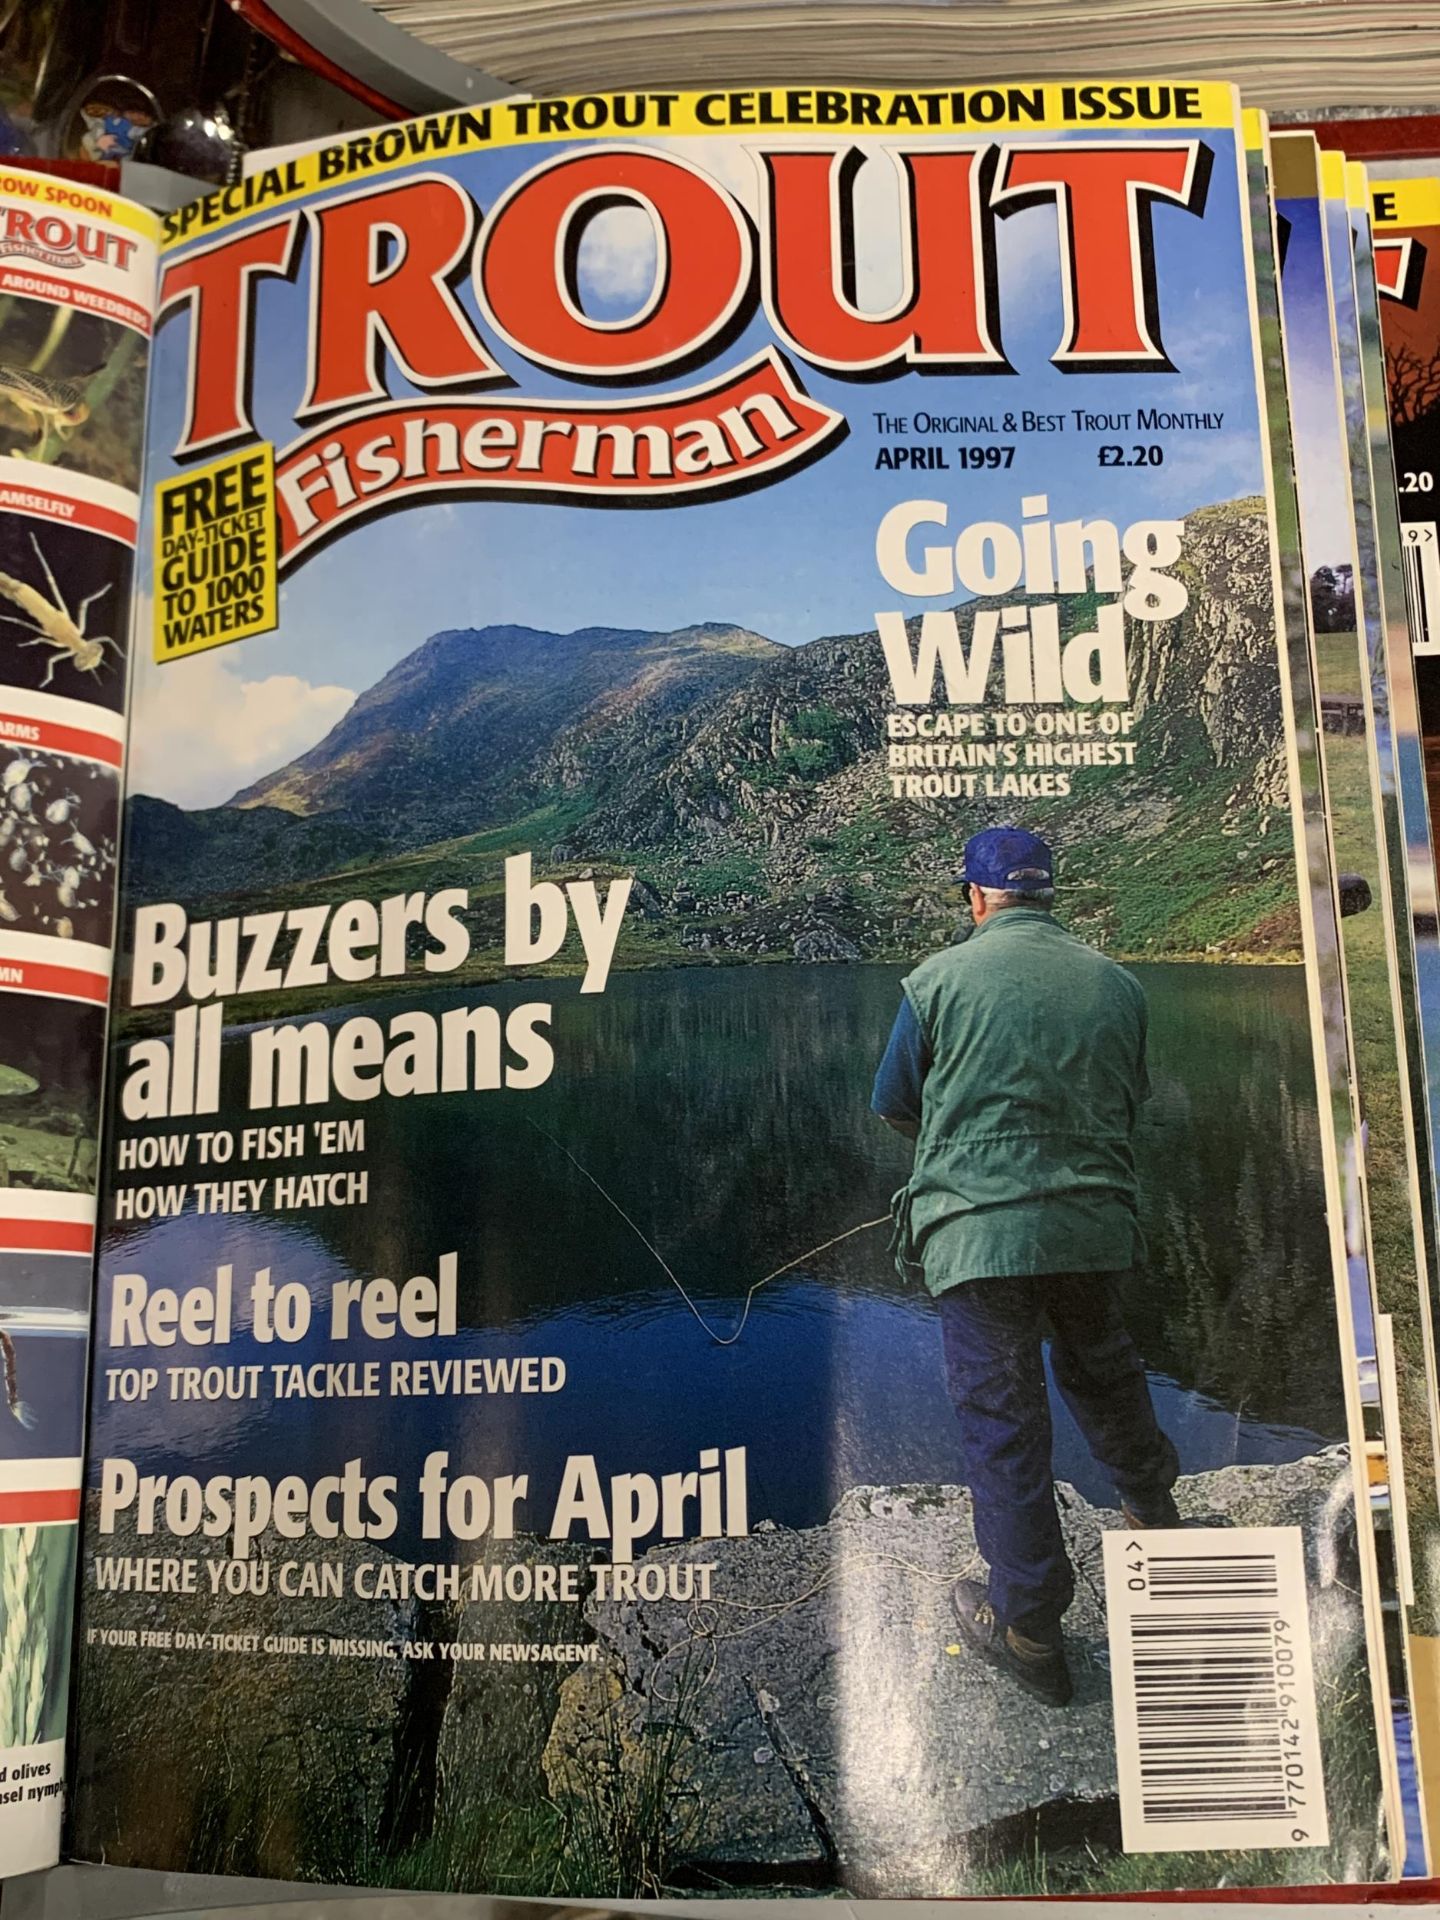 A LARGE COLLECTION OF FISHING MAGAZINES TO INCLUDE "TROUT FISHERMAN" AND "FLY FISHING AND FLY TYING" - Image 2 of 6